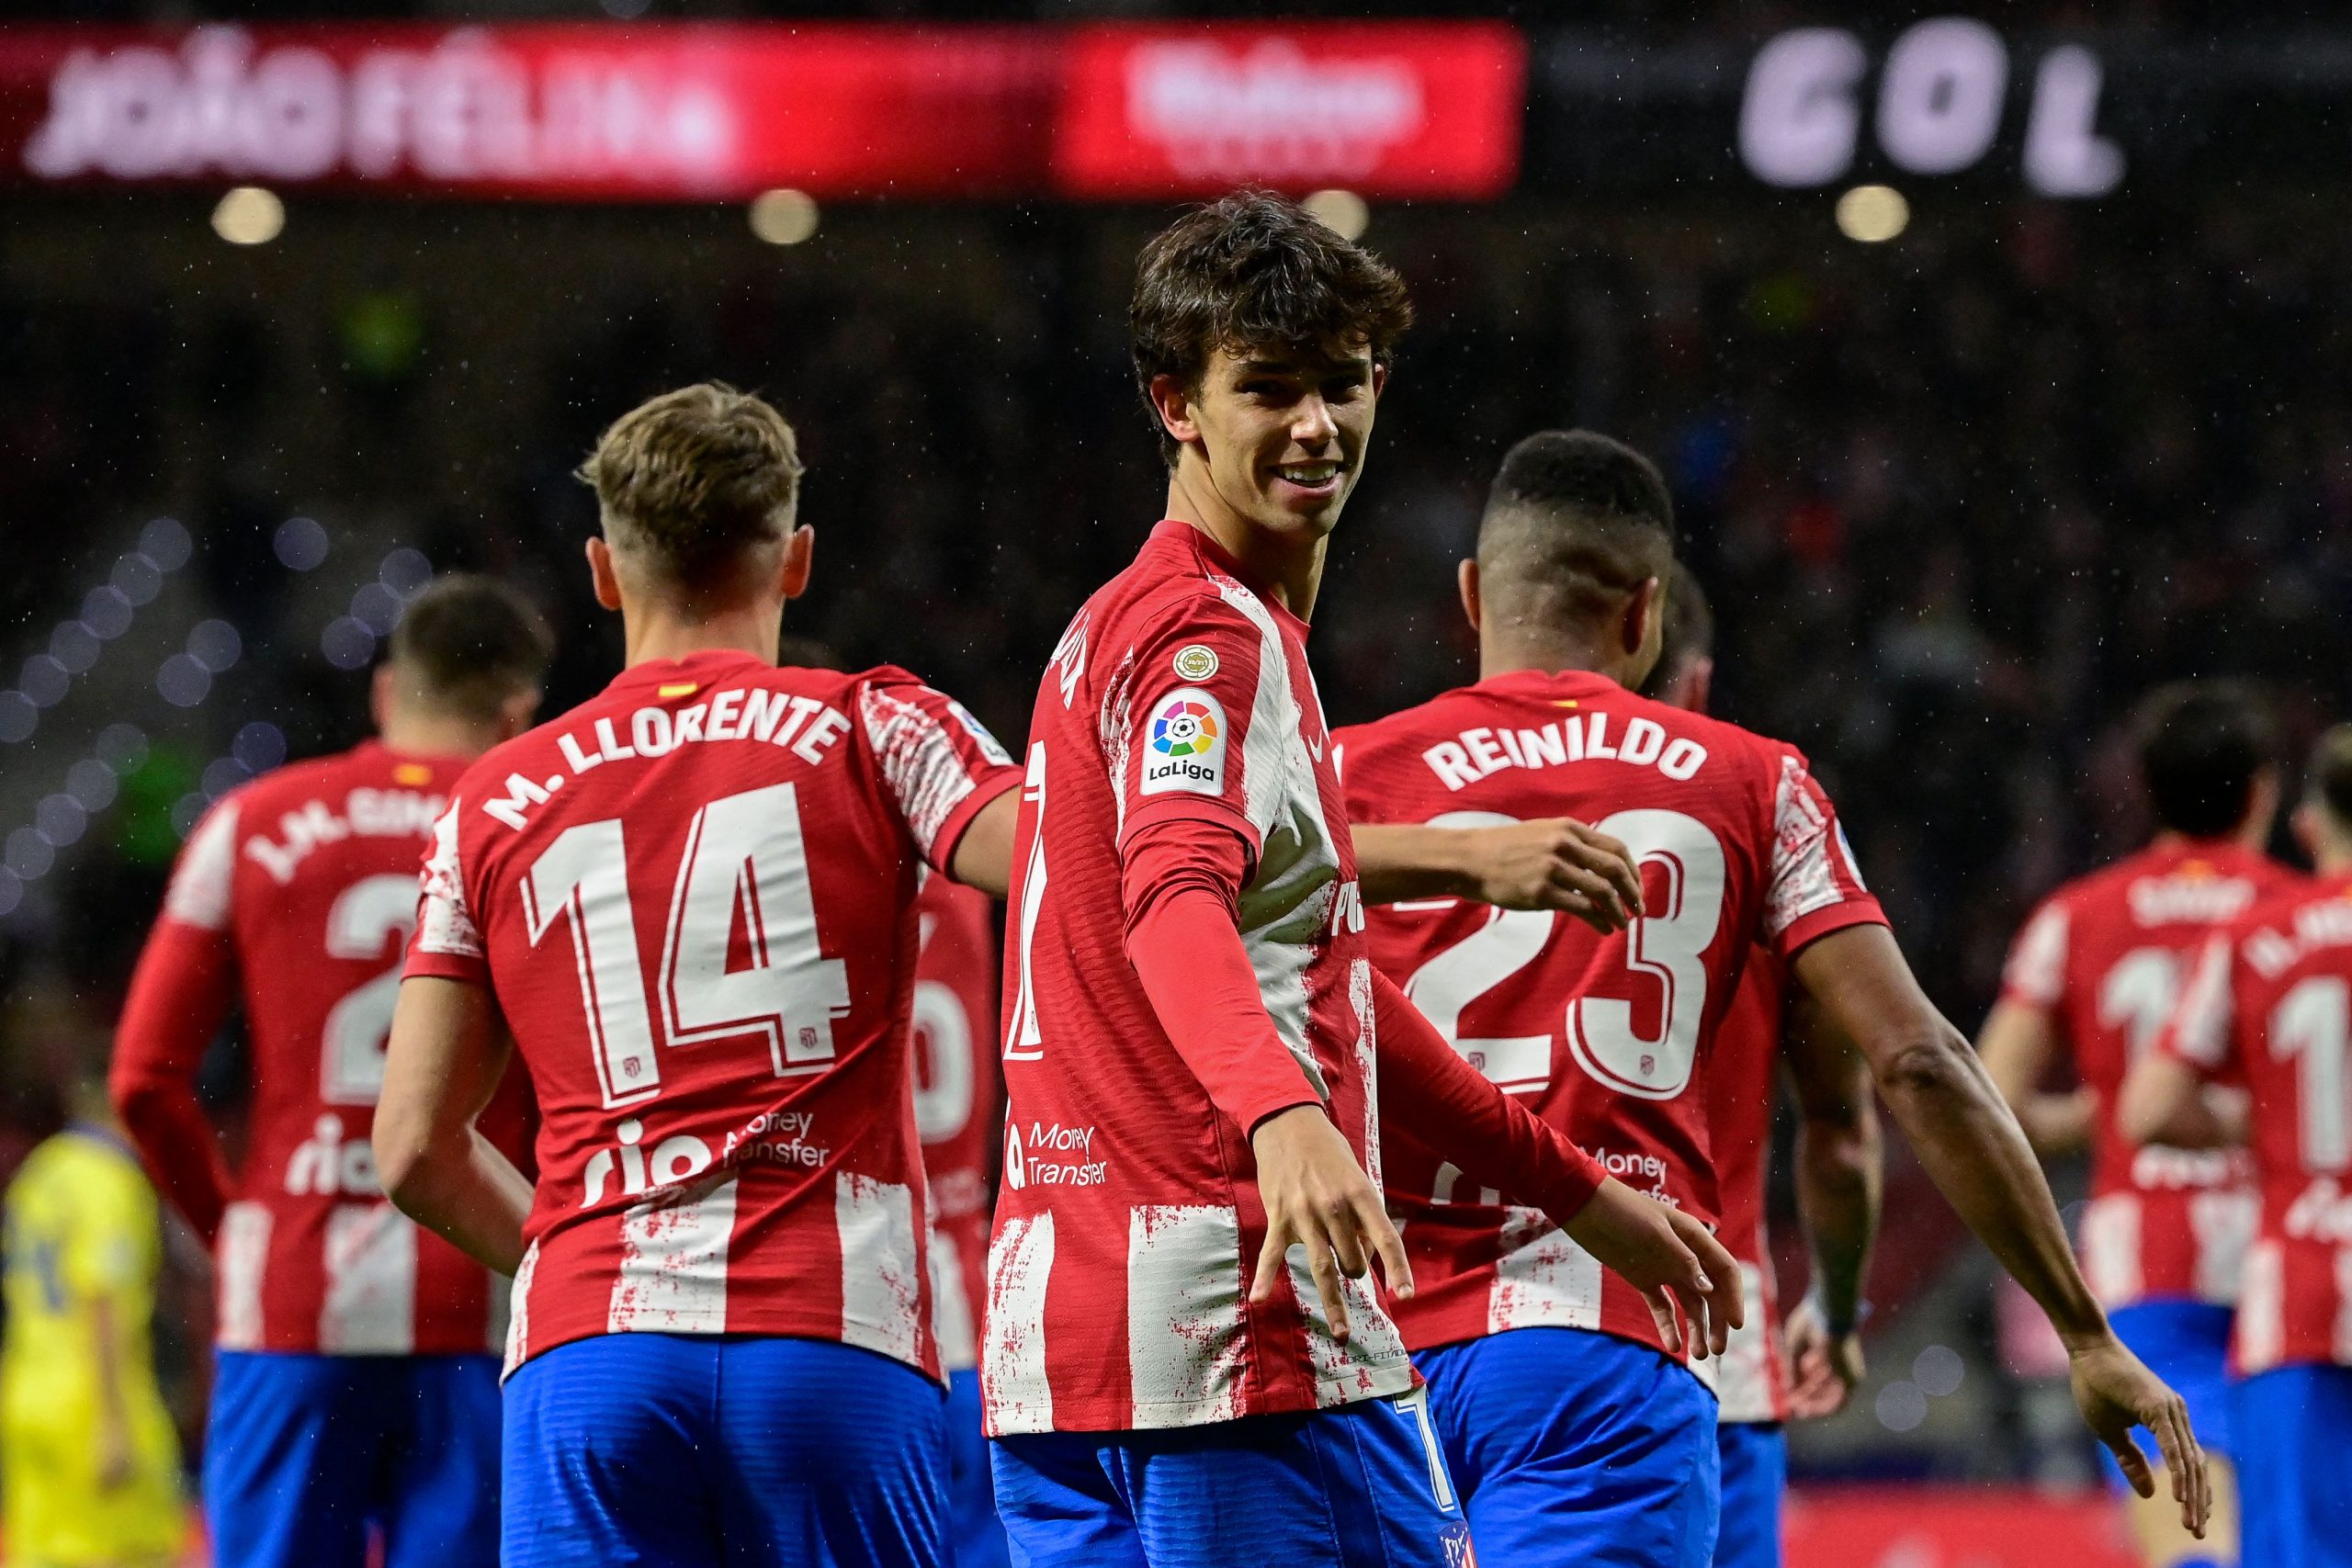 Atletico Madrid's Portuguese forward Joao Felix celebrates after scoring his team's first goal during the Spanish league football match between Club Atletico de Madrid and Cadiz CF at the Wanda Metropolitano stadium in Madrid on March 11, 2022. (Photo by JAVIER SORIANO / AFP) (Photo by JAVIER SORIANO/AFP via Getty Images) The 4th Official uses images provided by the following image agency: Getty Images (https://www.gettyimages.de/) and Imago Images (https://www.imago-images.de/)